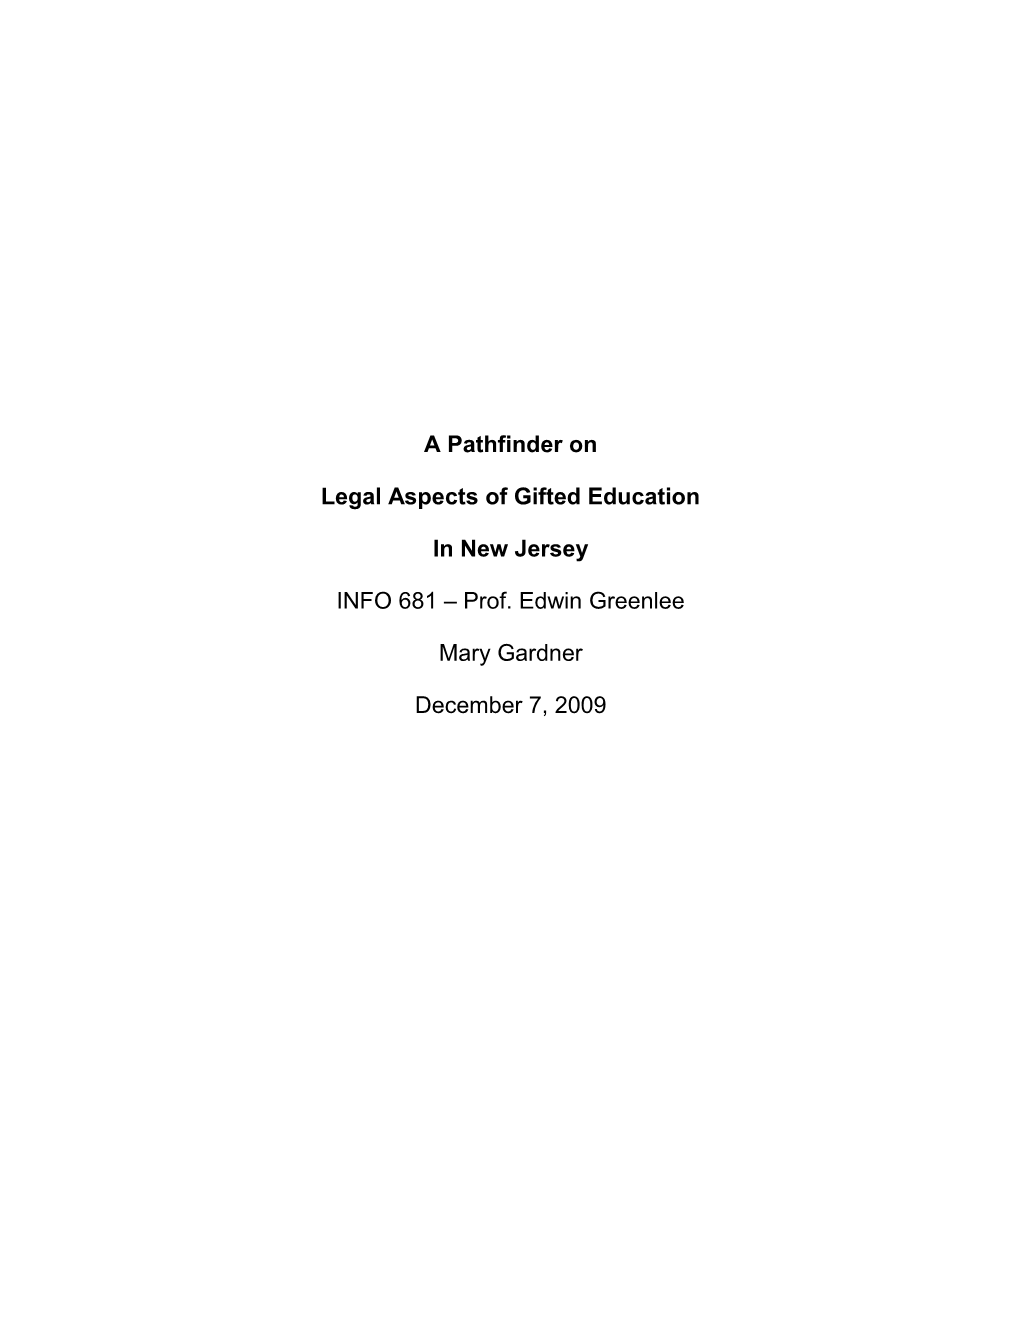 Legal Aspects of Gifted Education